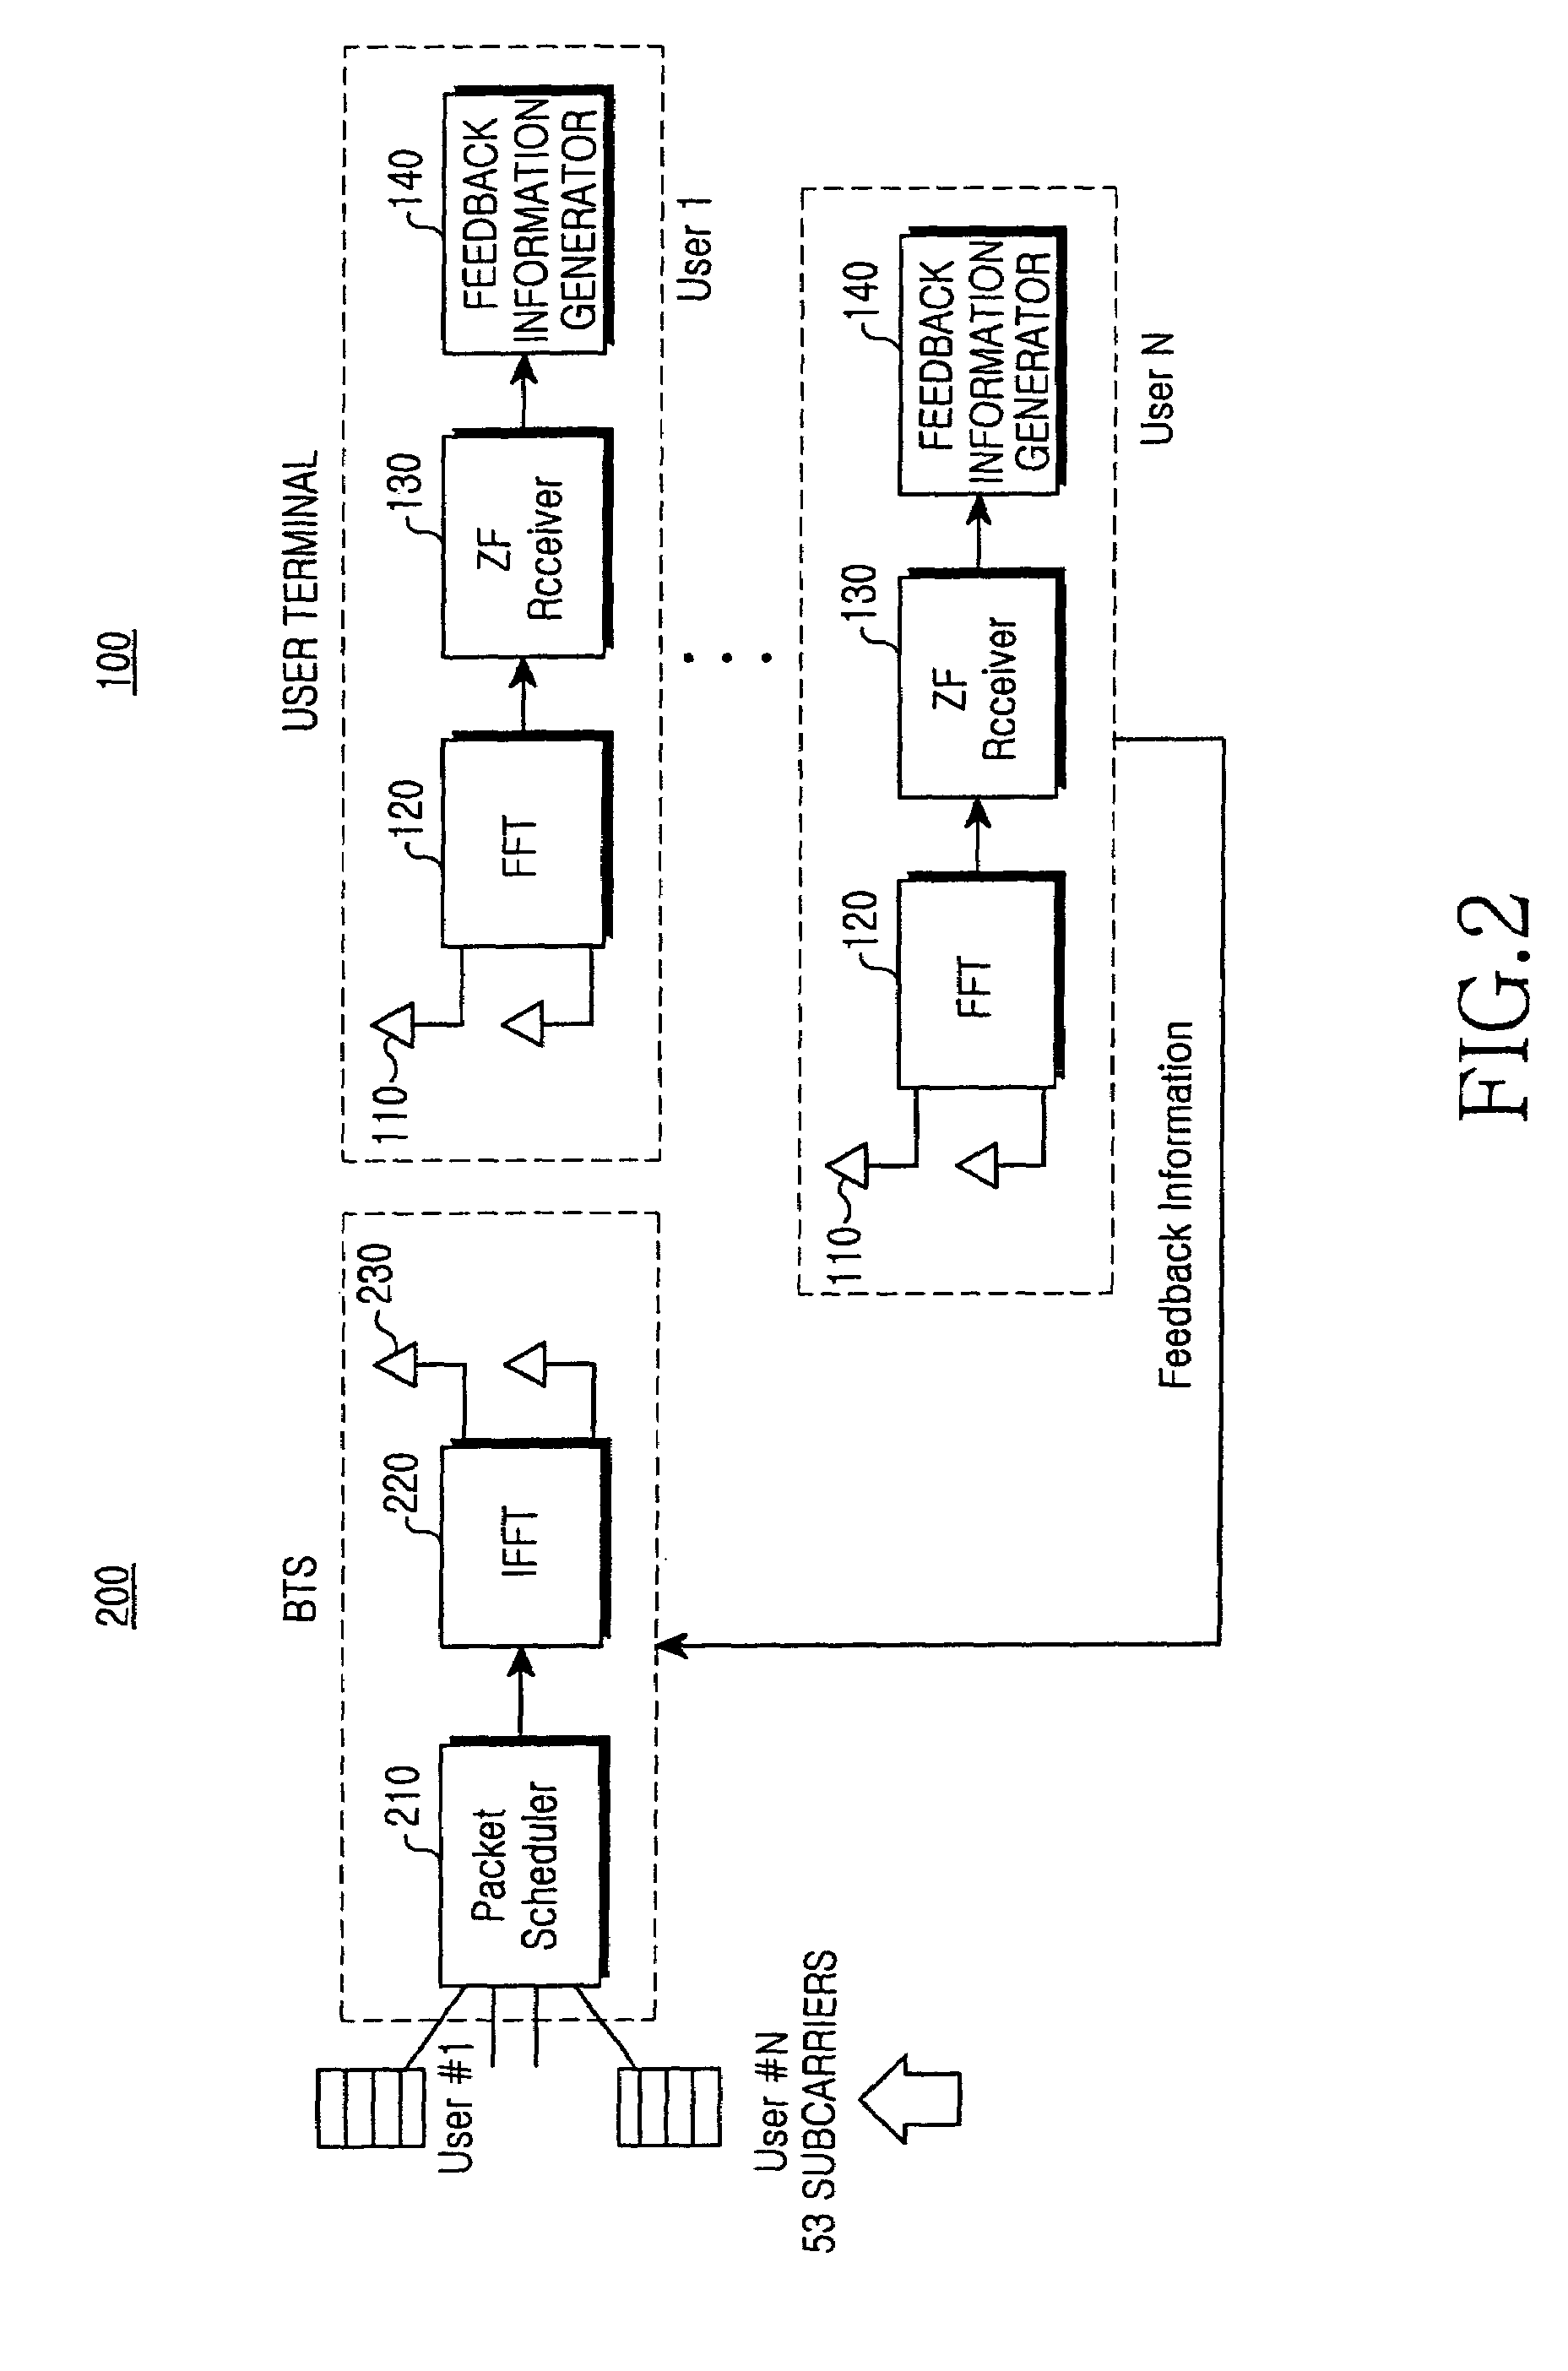 Method and apparatus for scheduling downlink channels in an orthogonal frequency division multiple access system and a system using the same